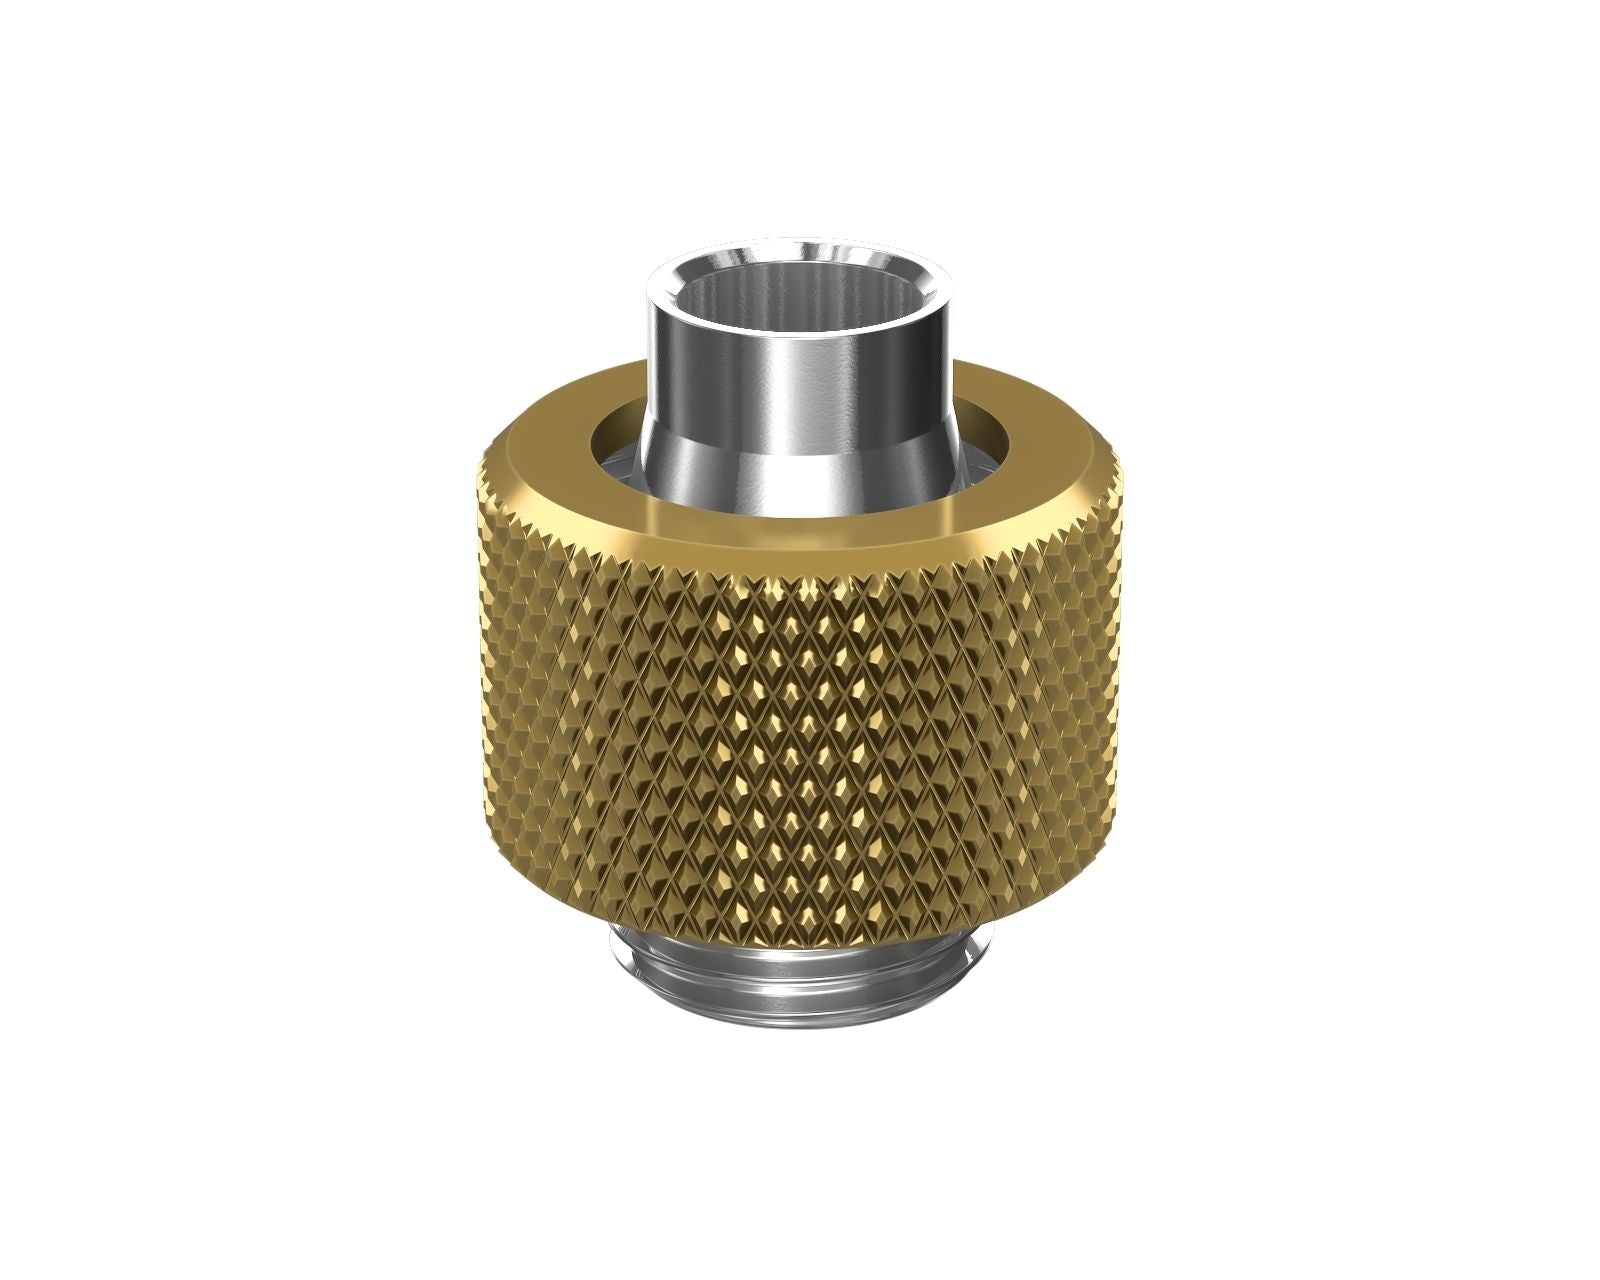 PrimoChill SecureFit SX - Premium Compression Fitting For 3/8in ID x 1/2in OD Flexible Tubing (F-SFSX12) - Available in 20+ Colors, Custom Watercooling Loop Ready - Candy Gold